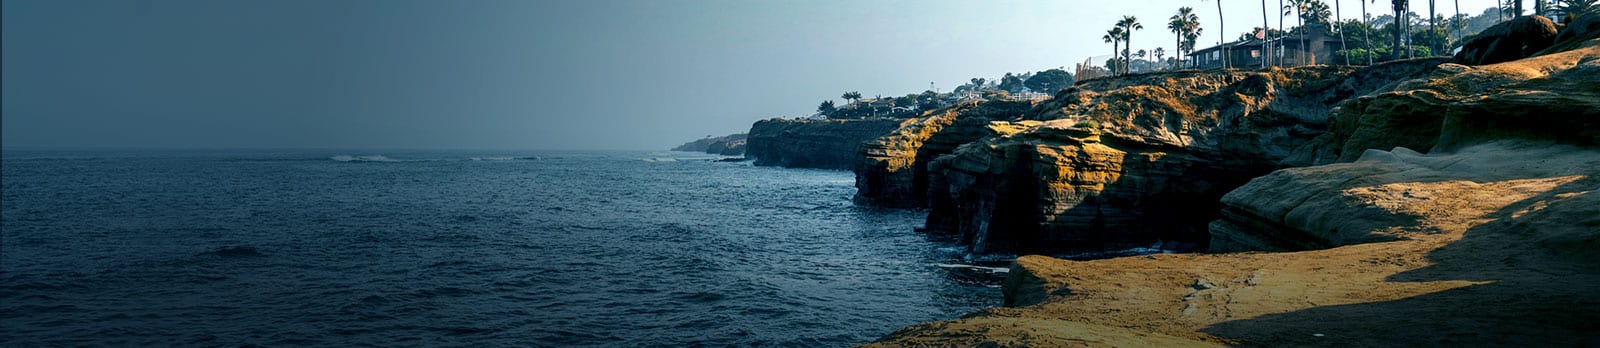 cliffs and palm trees along coast